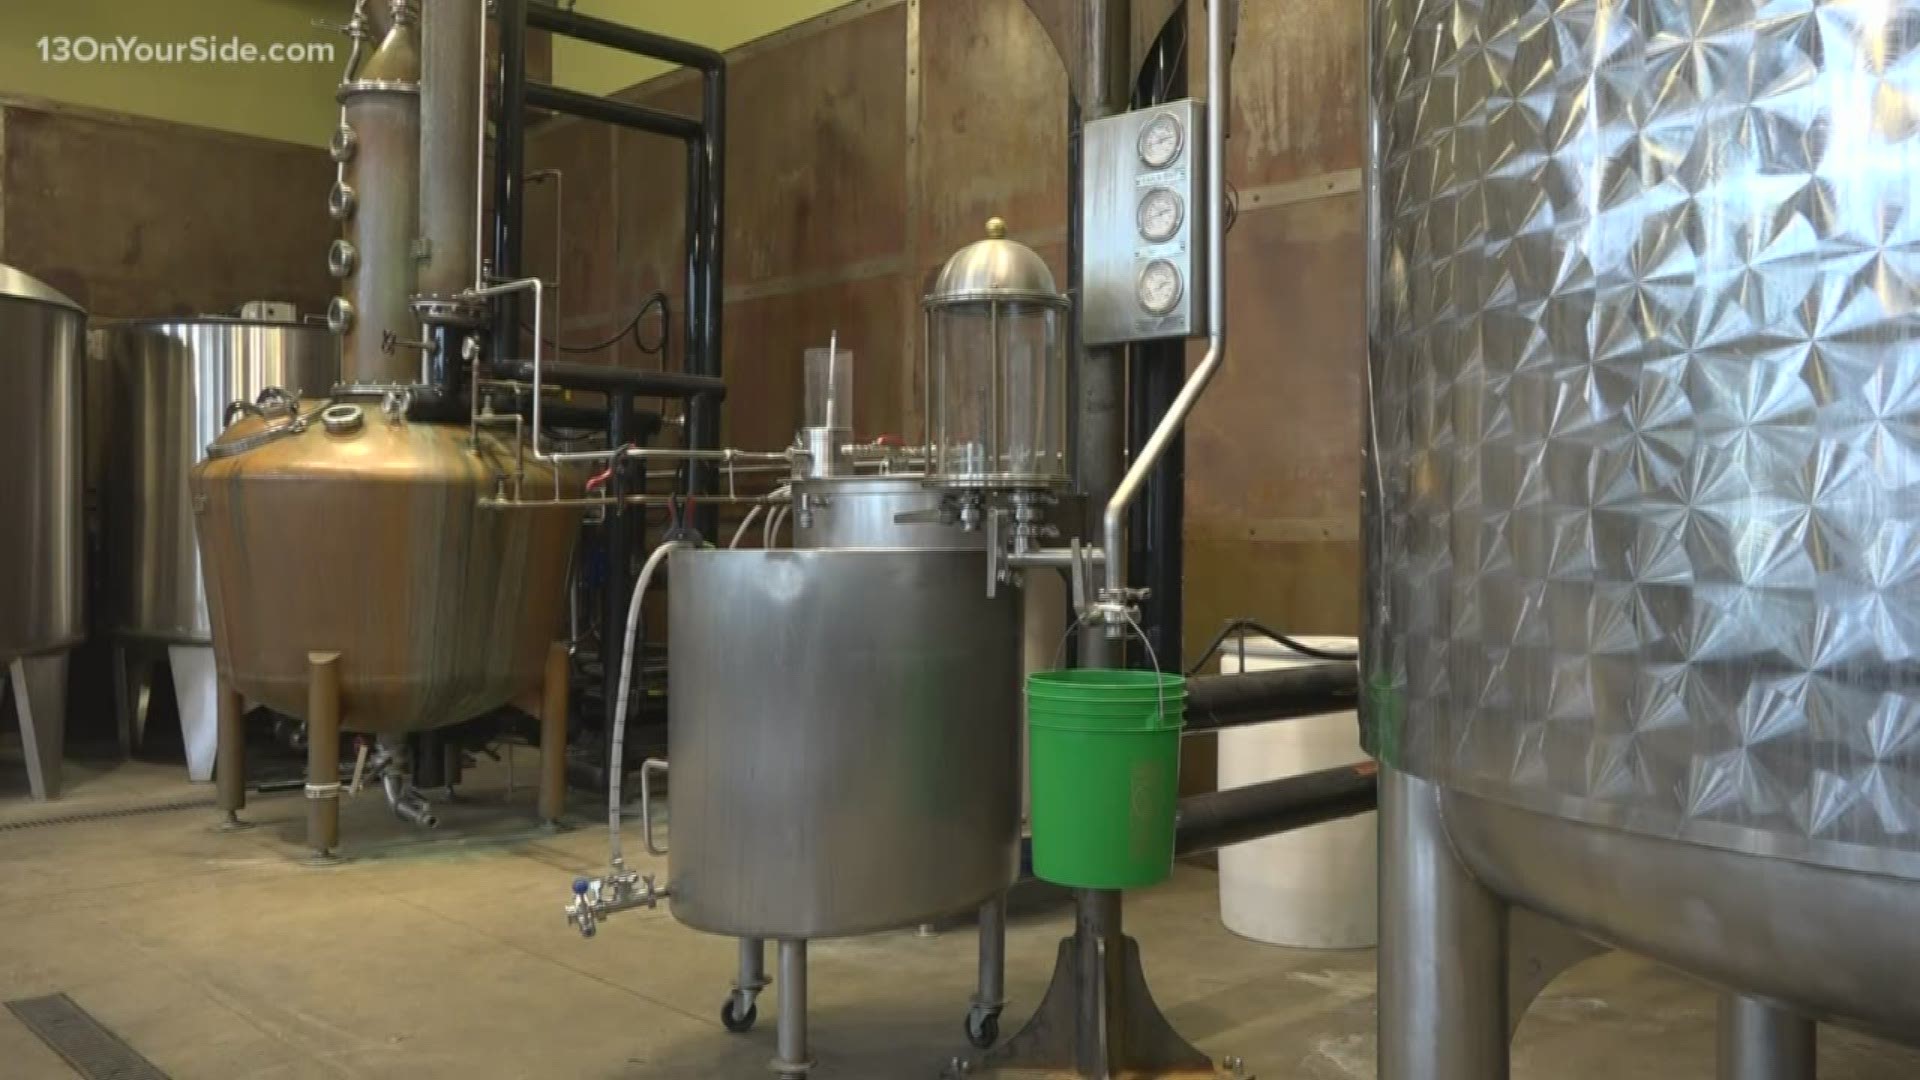 Coppercraft Distillery will make around 10,000 gallons of the sanitizer.